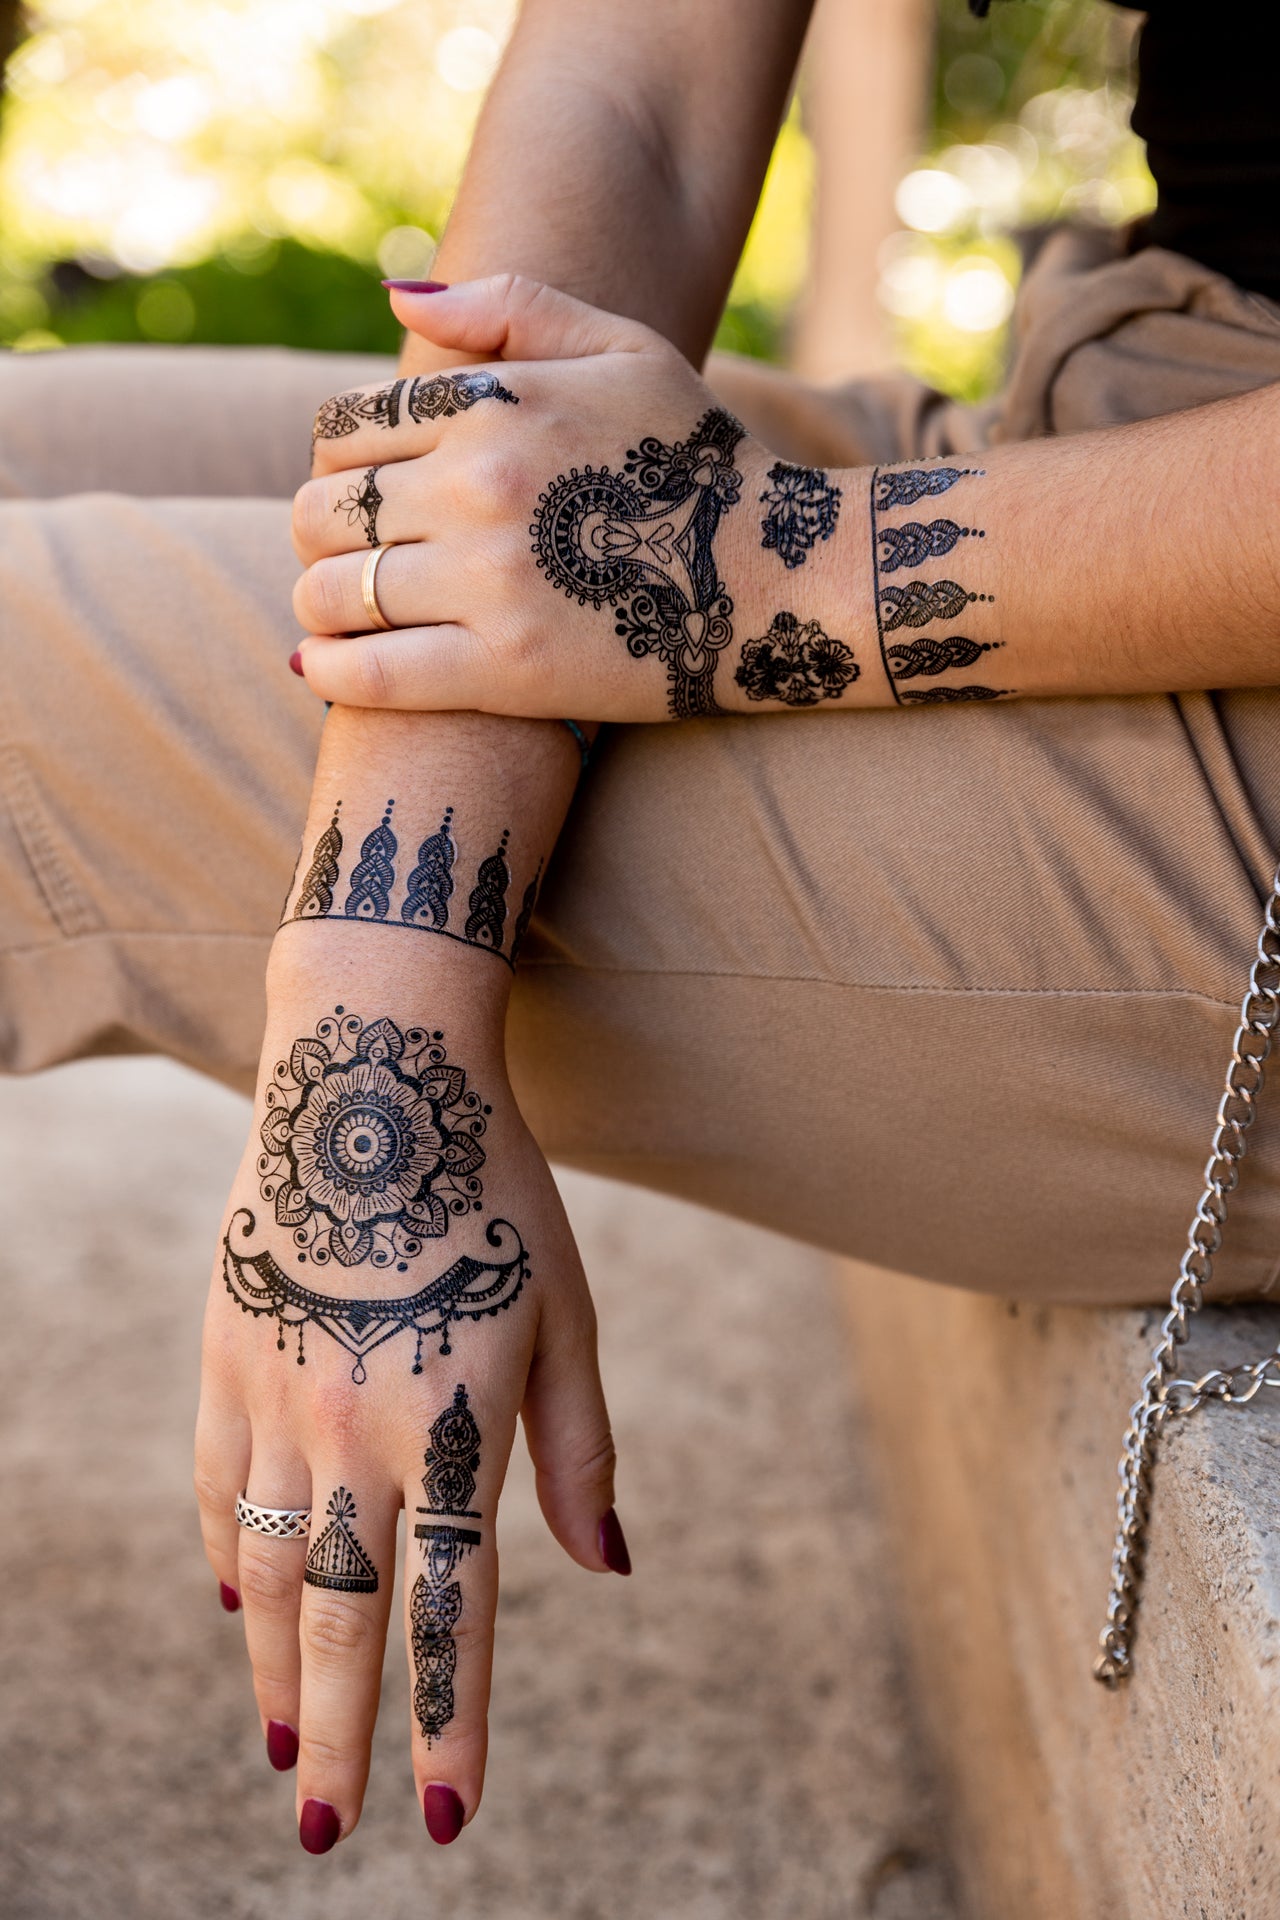 Mother Sends Warning To Bali Holidaymakers About Dangers Of Black Henna  Tattoos  The Bali Sun